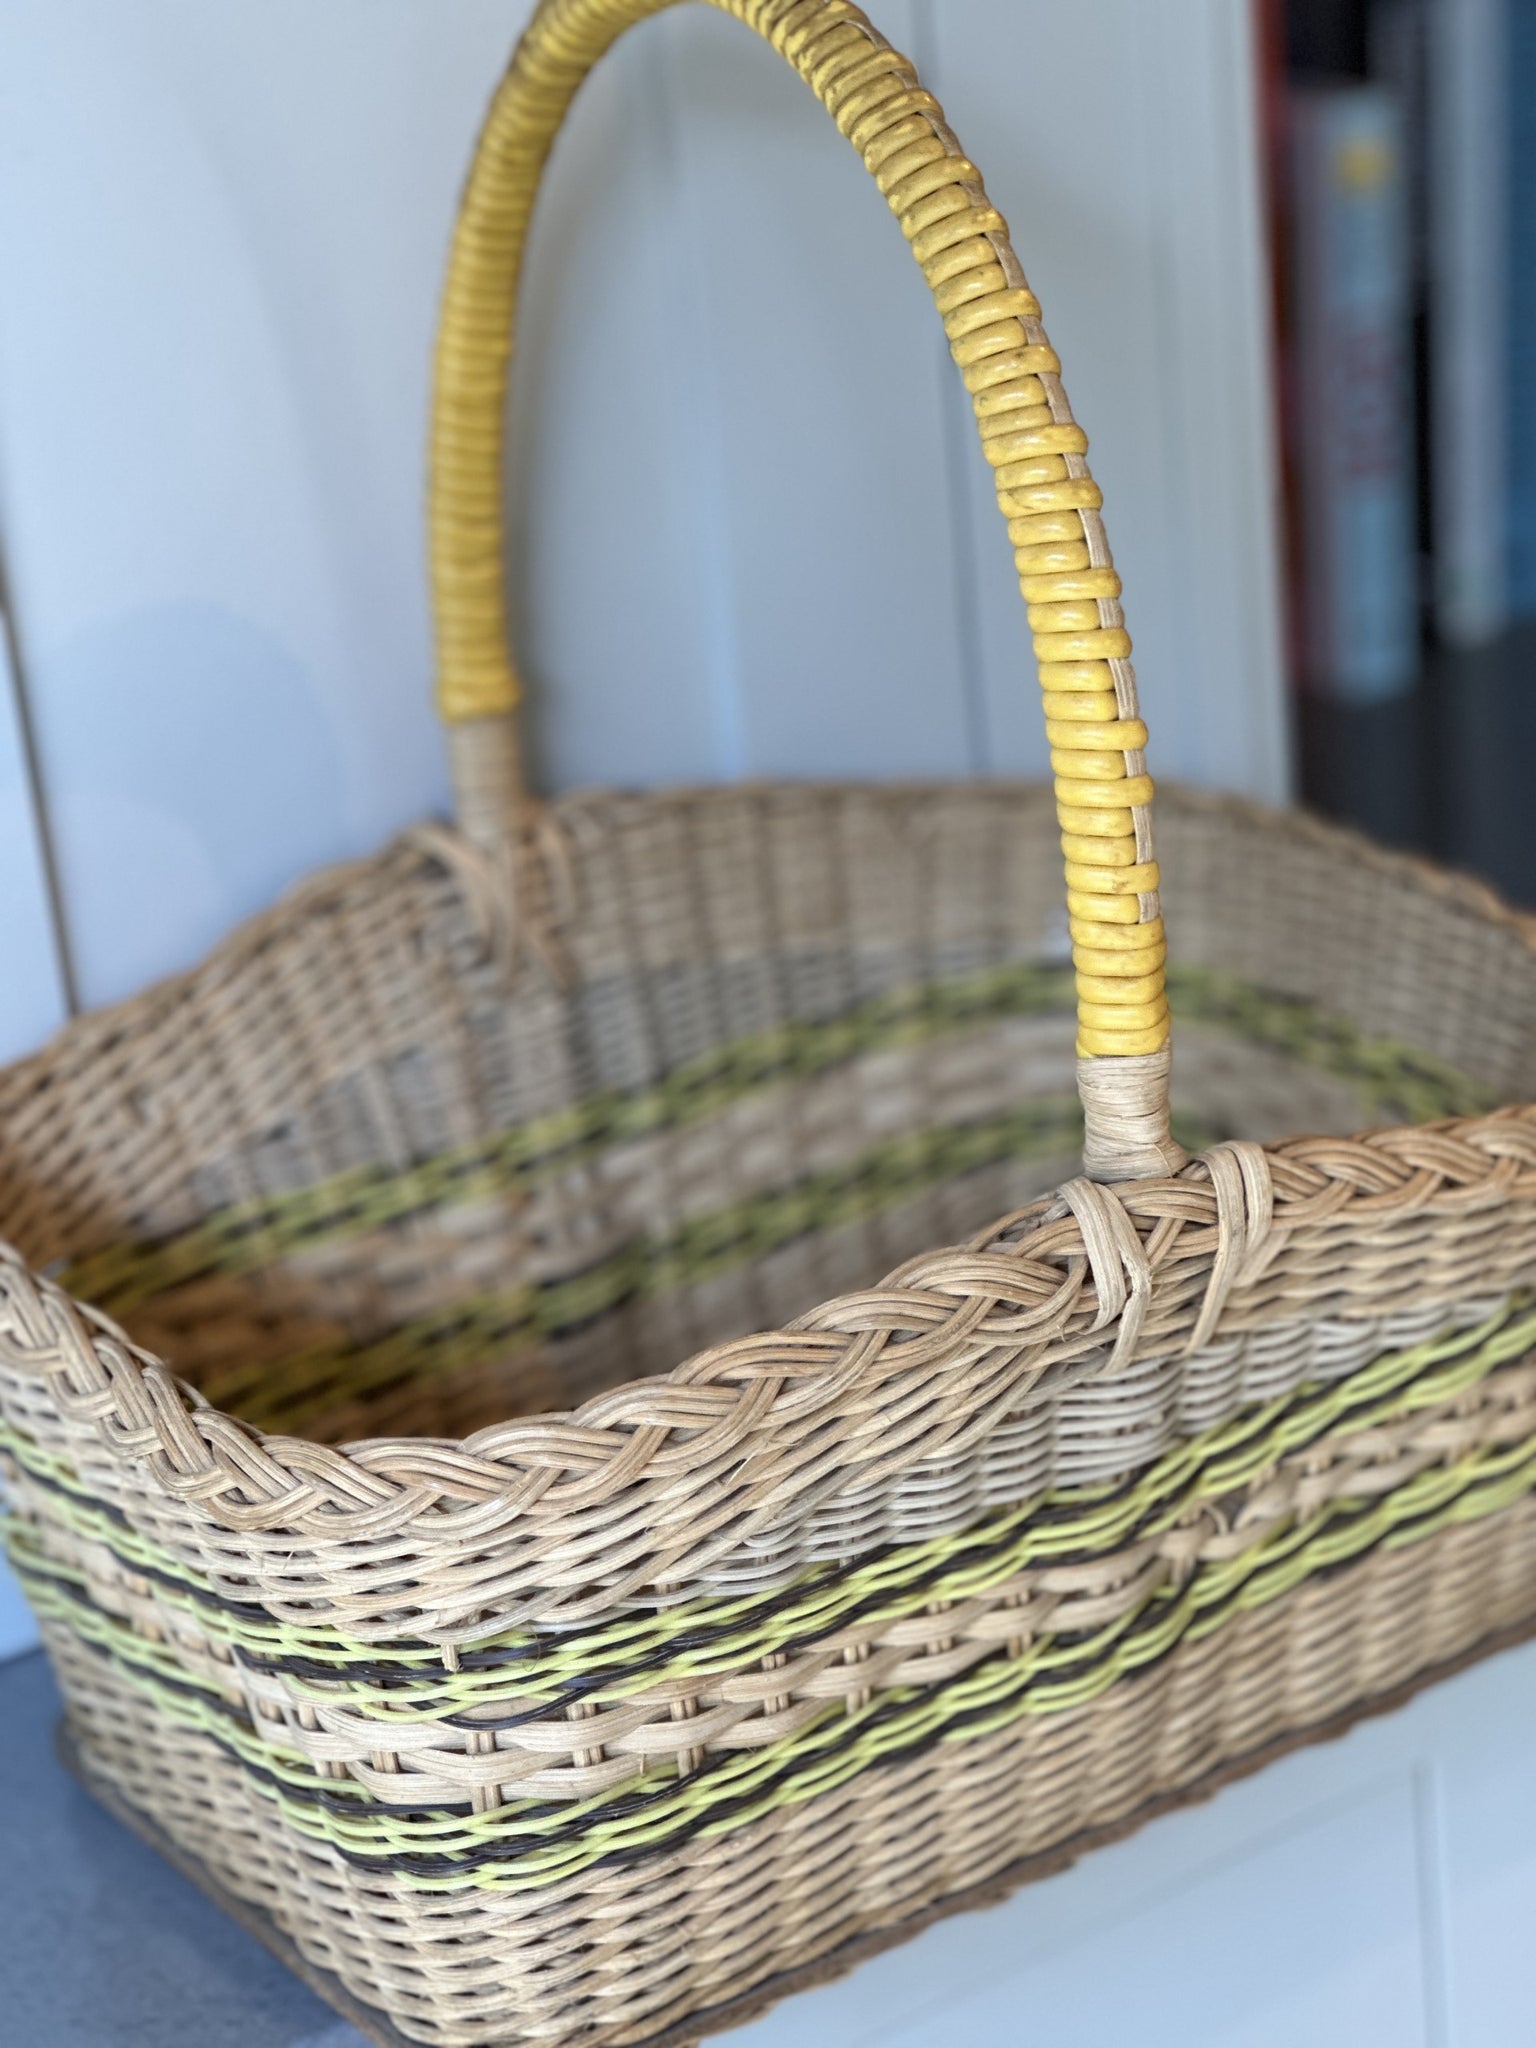 Vintage Wicker Basket with Yellow and Brown accents